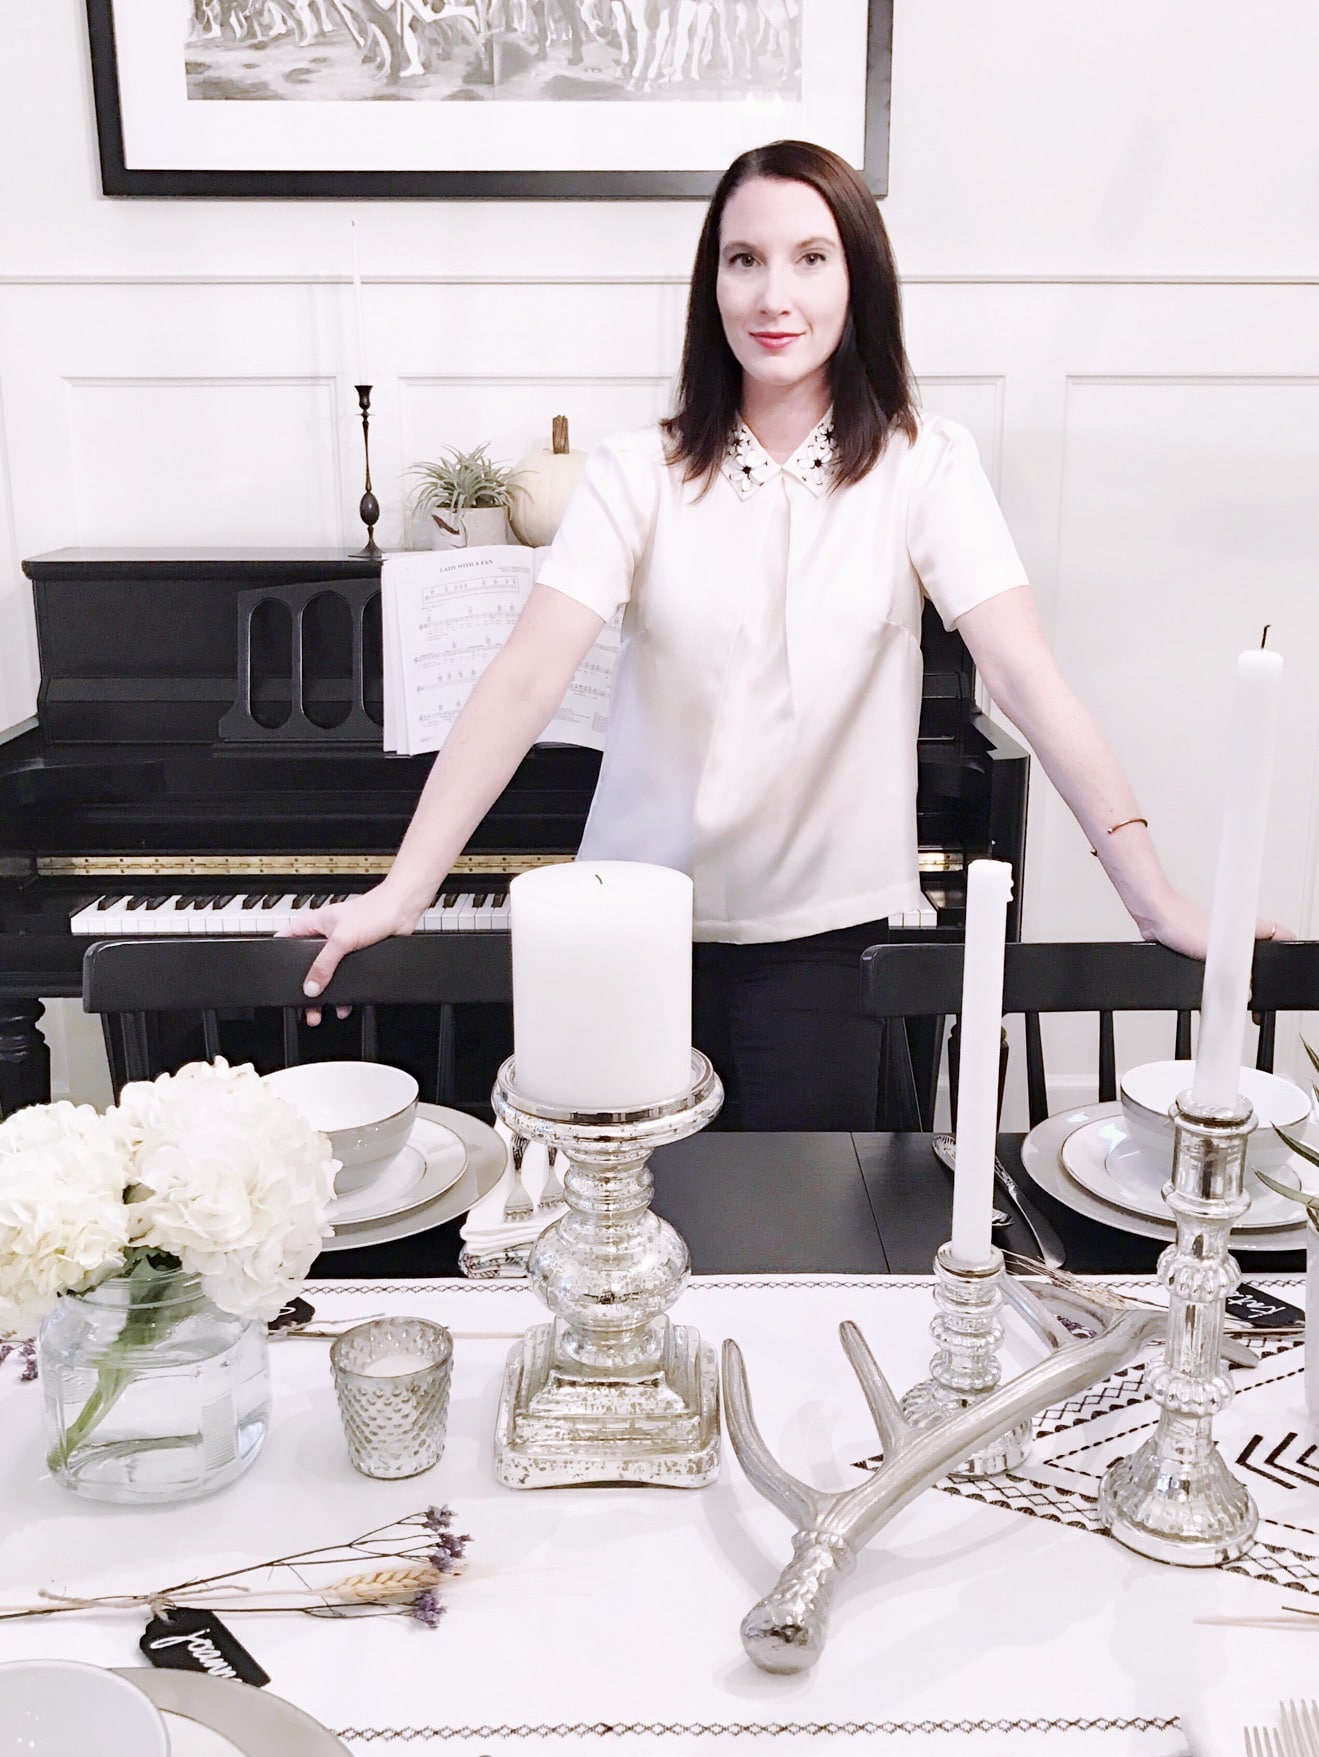 clea-shearer-of-the-home-edit-designs-a-black-and-white-tablescape-on-fashionablehostess2